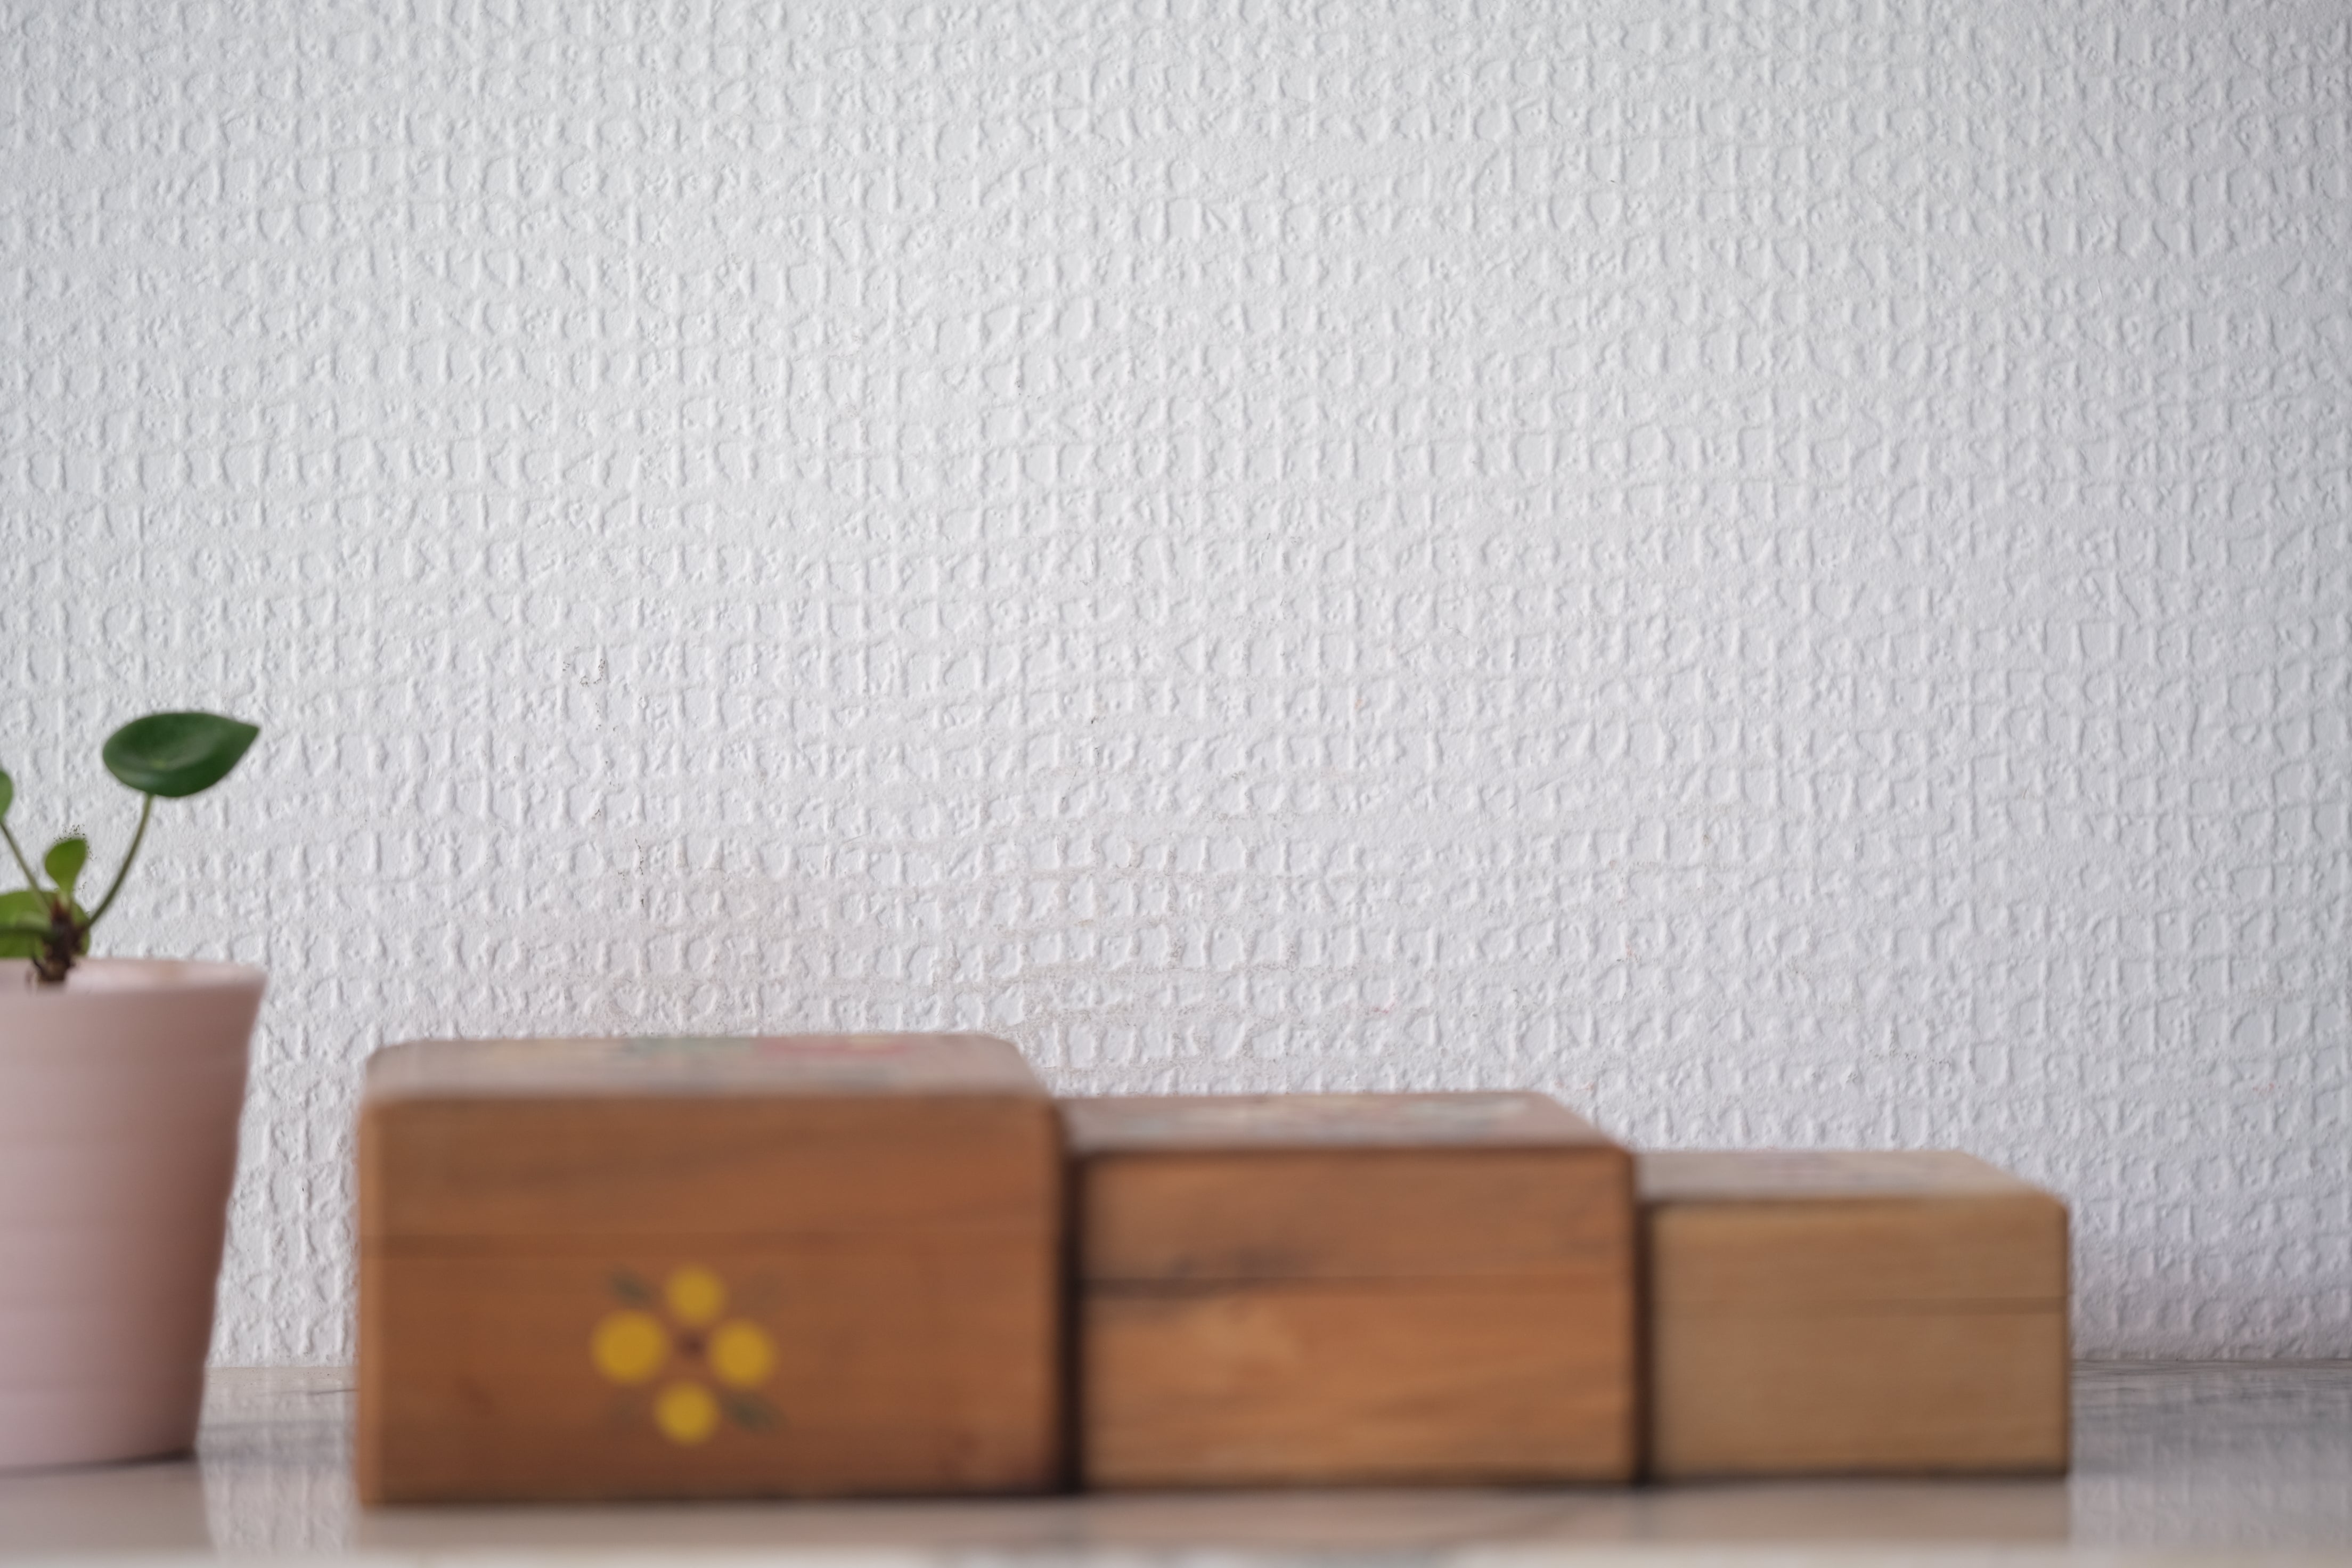 Three Vintage Kokeshi Jewelry boxes | They fit in each oyther | 10 cm x 8,5 cm x 5 cm